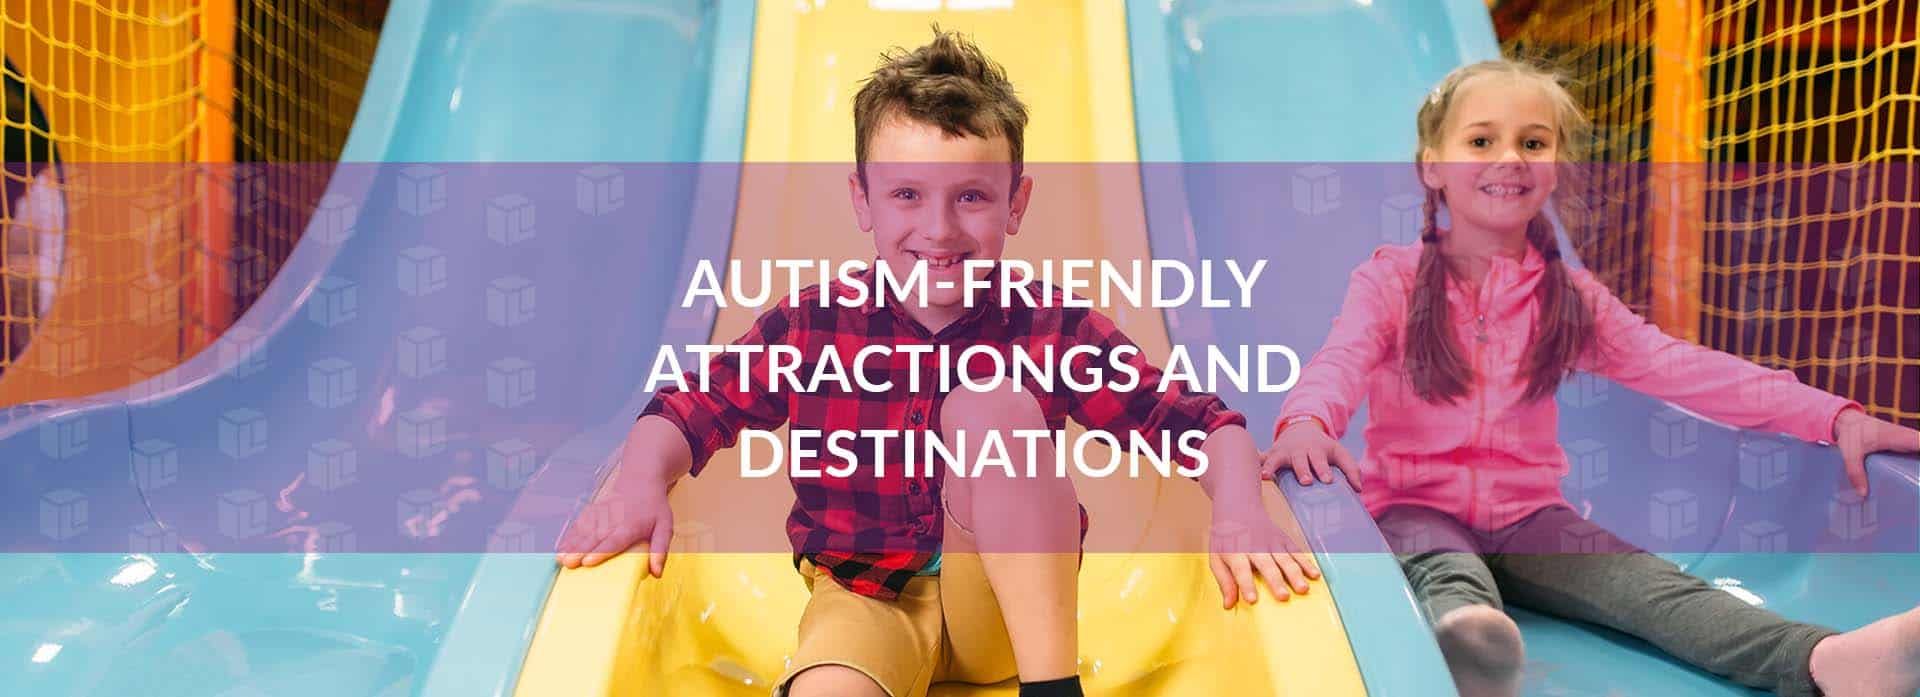 Autism-Friendly Attractions And Destinations Autism-Friendly Attractions And Destinations Autism-Friendly Attractions And Destinations Autism-Friendly Attractions And Destinations